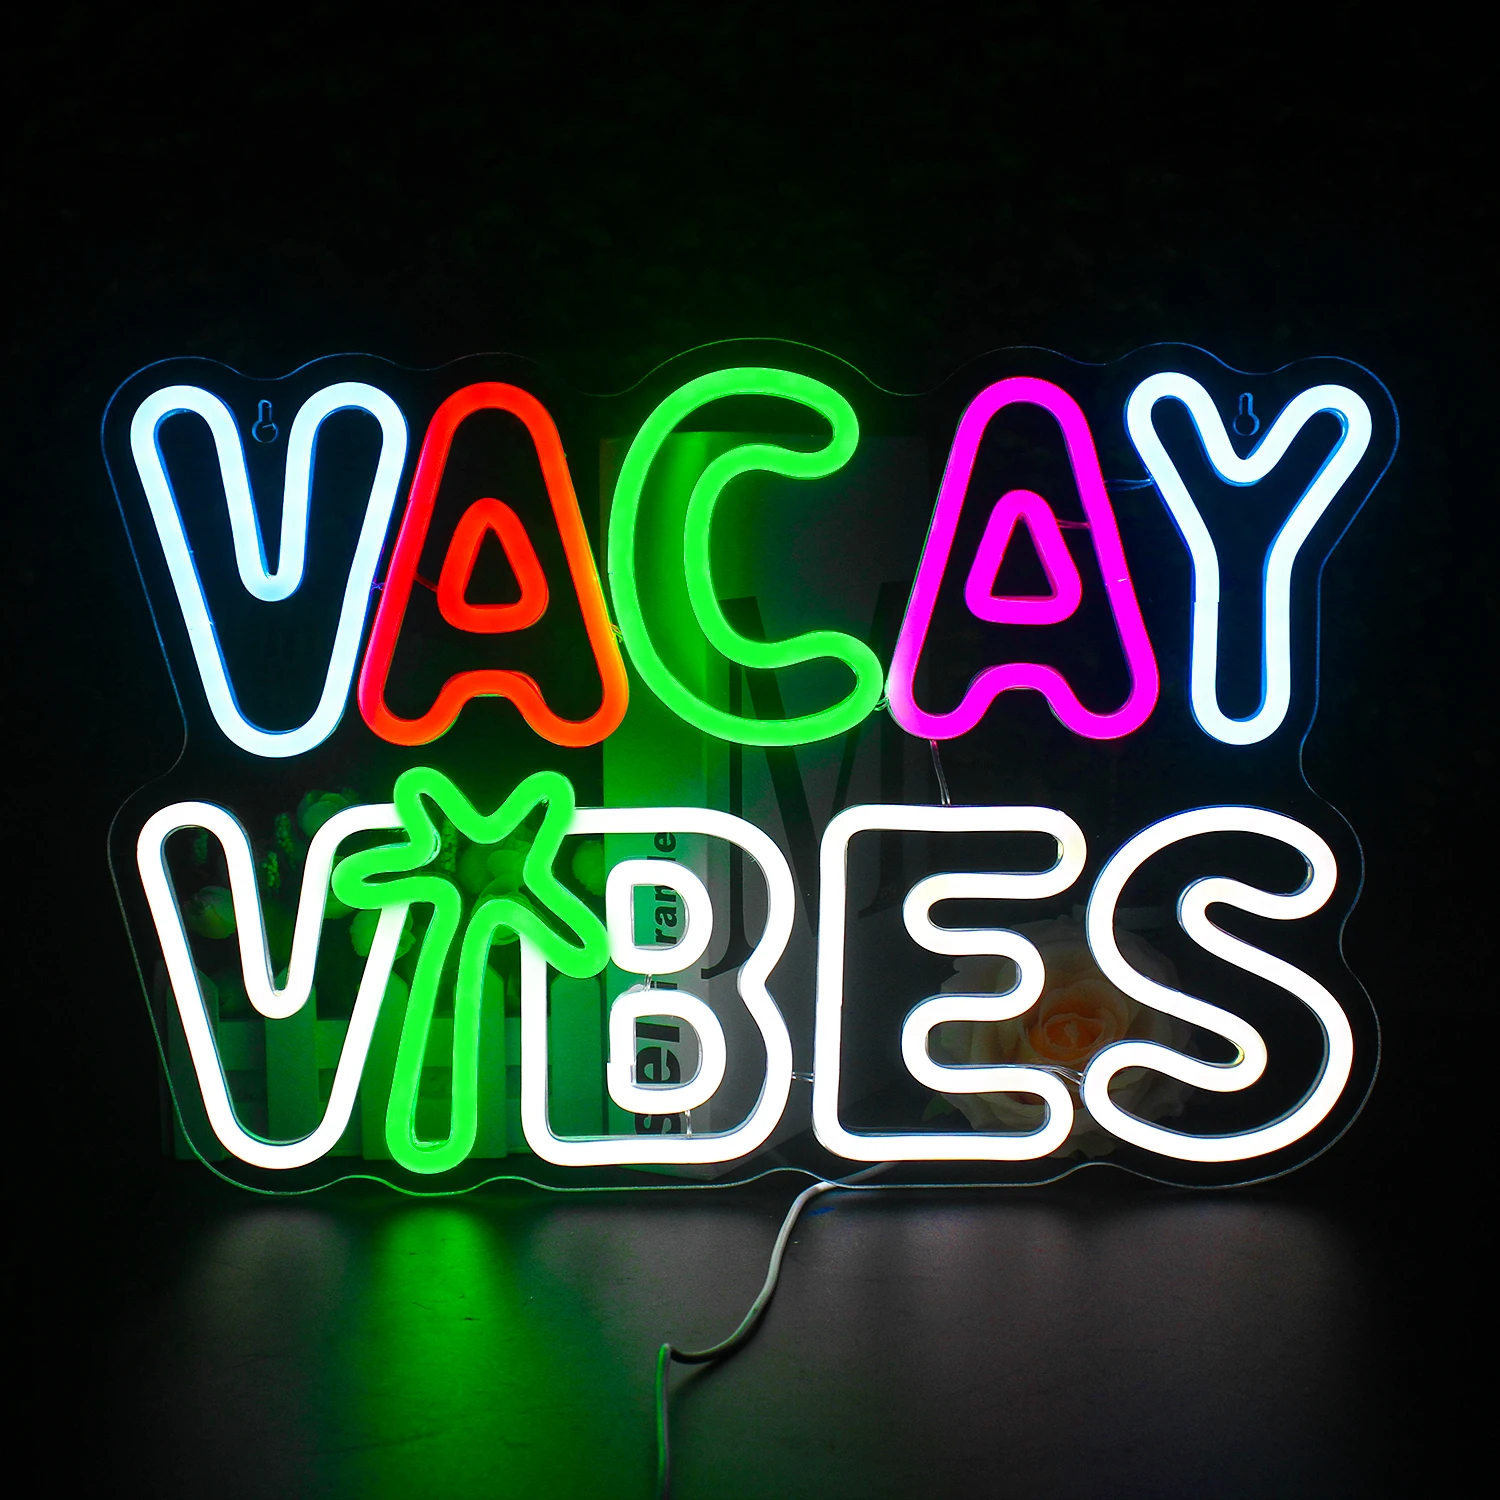 

LED Neon Light VACAY TBES Neon Signs for Club Luminous Wedding Party Game Room Store Wall Hangings USB Acrylic Art Neon